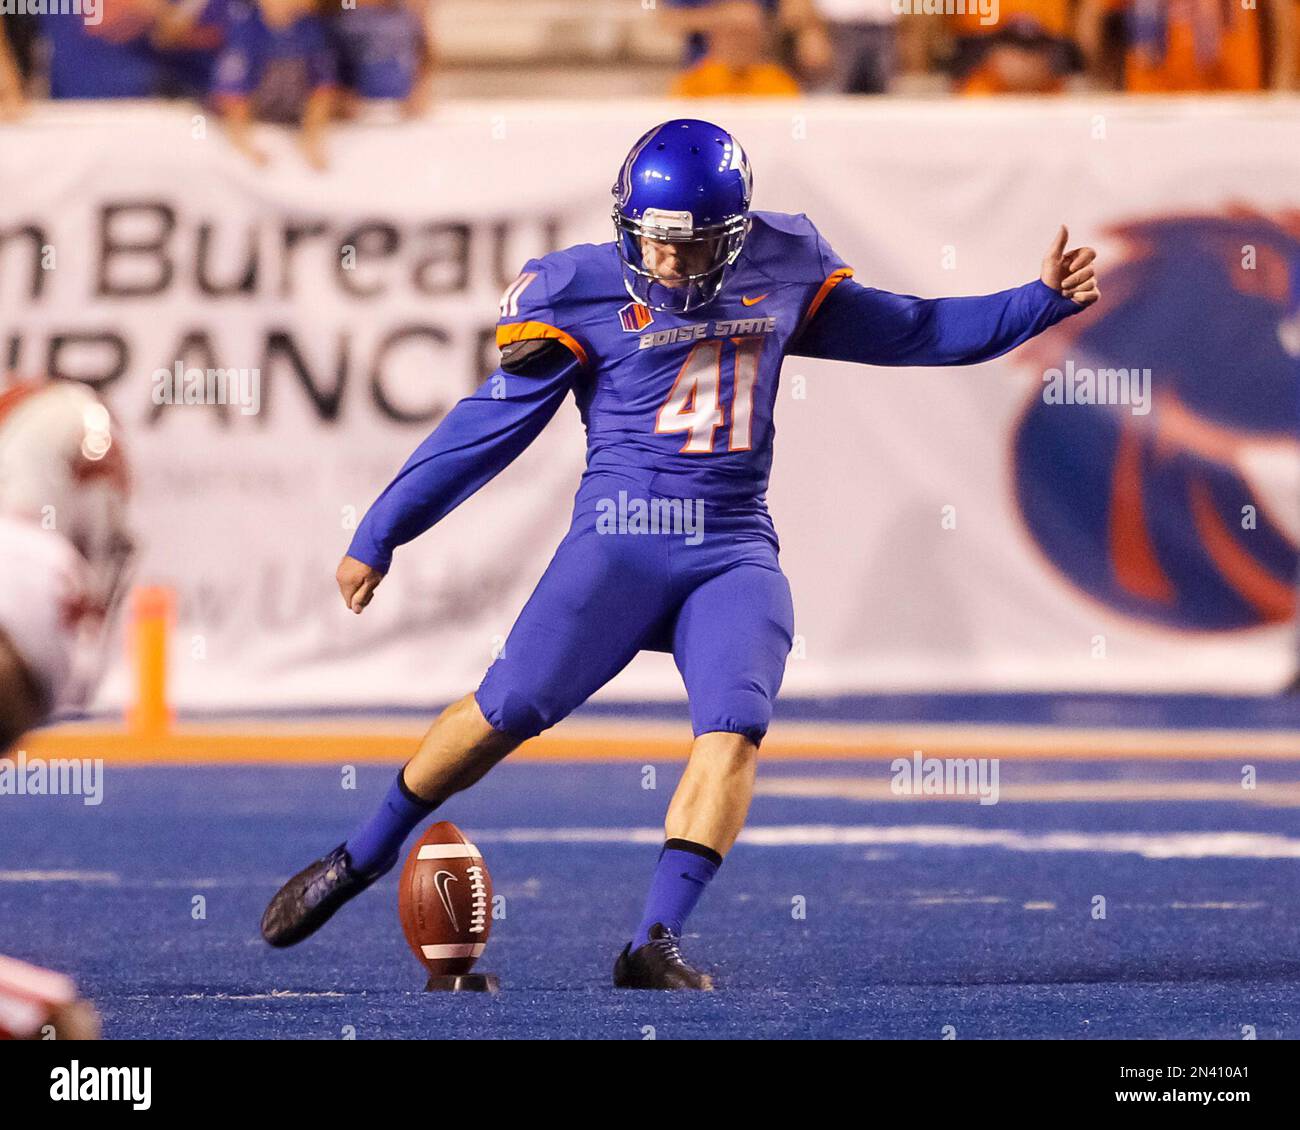 Boise State kicker Dan Goodale (41) kicks the ball during the second half  of an NCAA college football game against Louisiana-Lafayette in Boise,  Idaho, on Saturday, Sept. 20, 2014. Boise State won